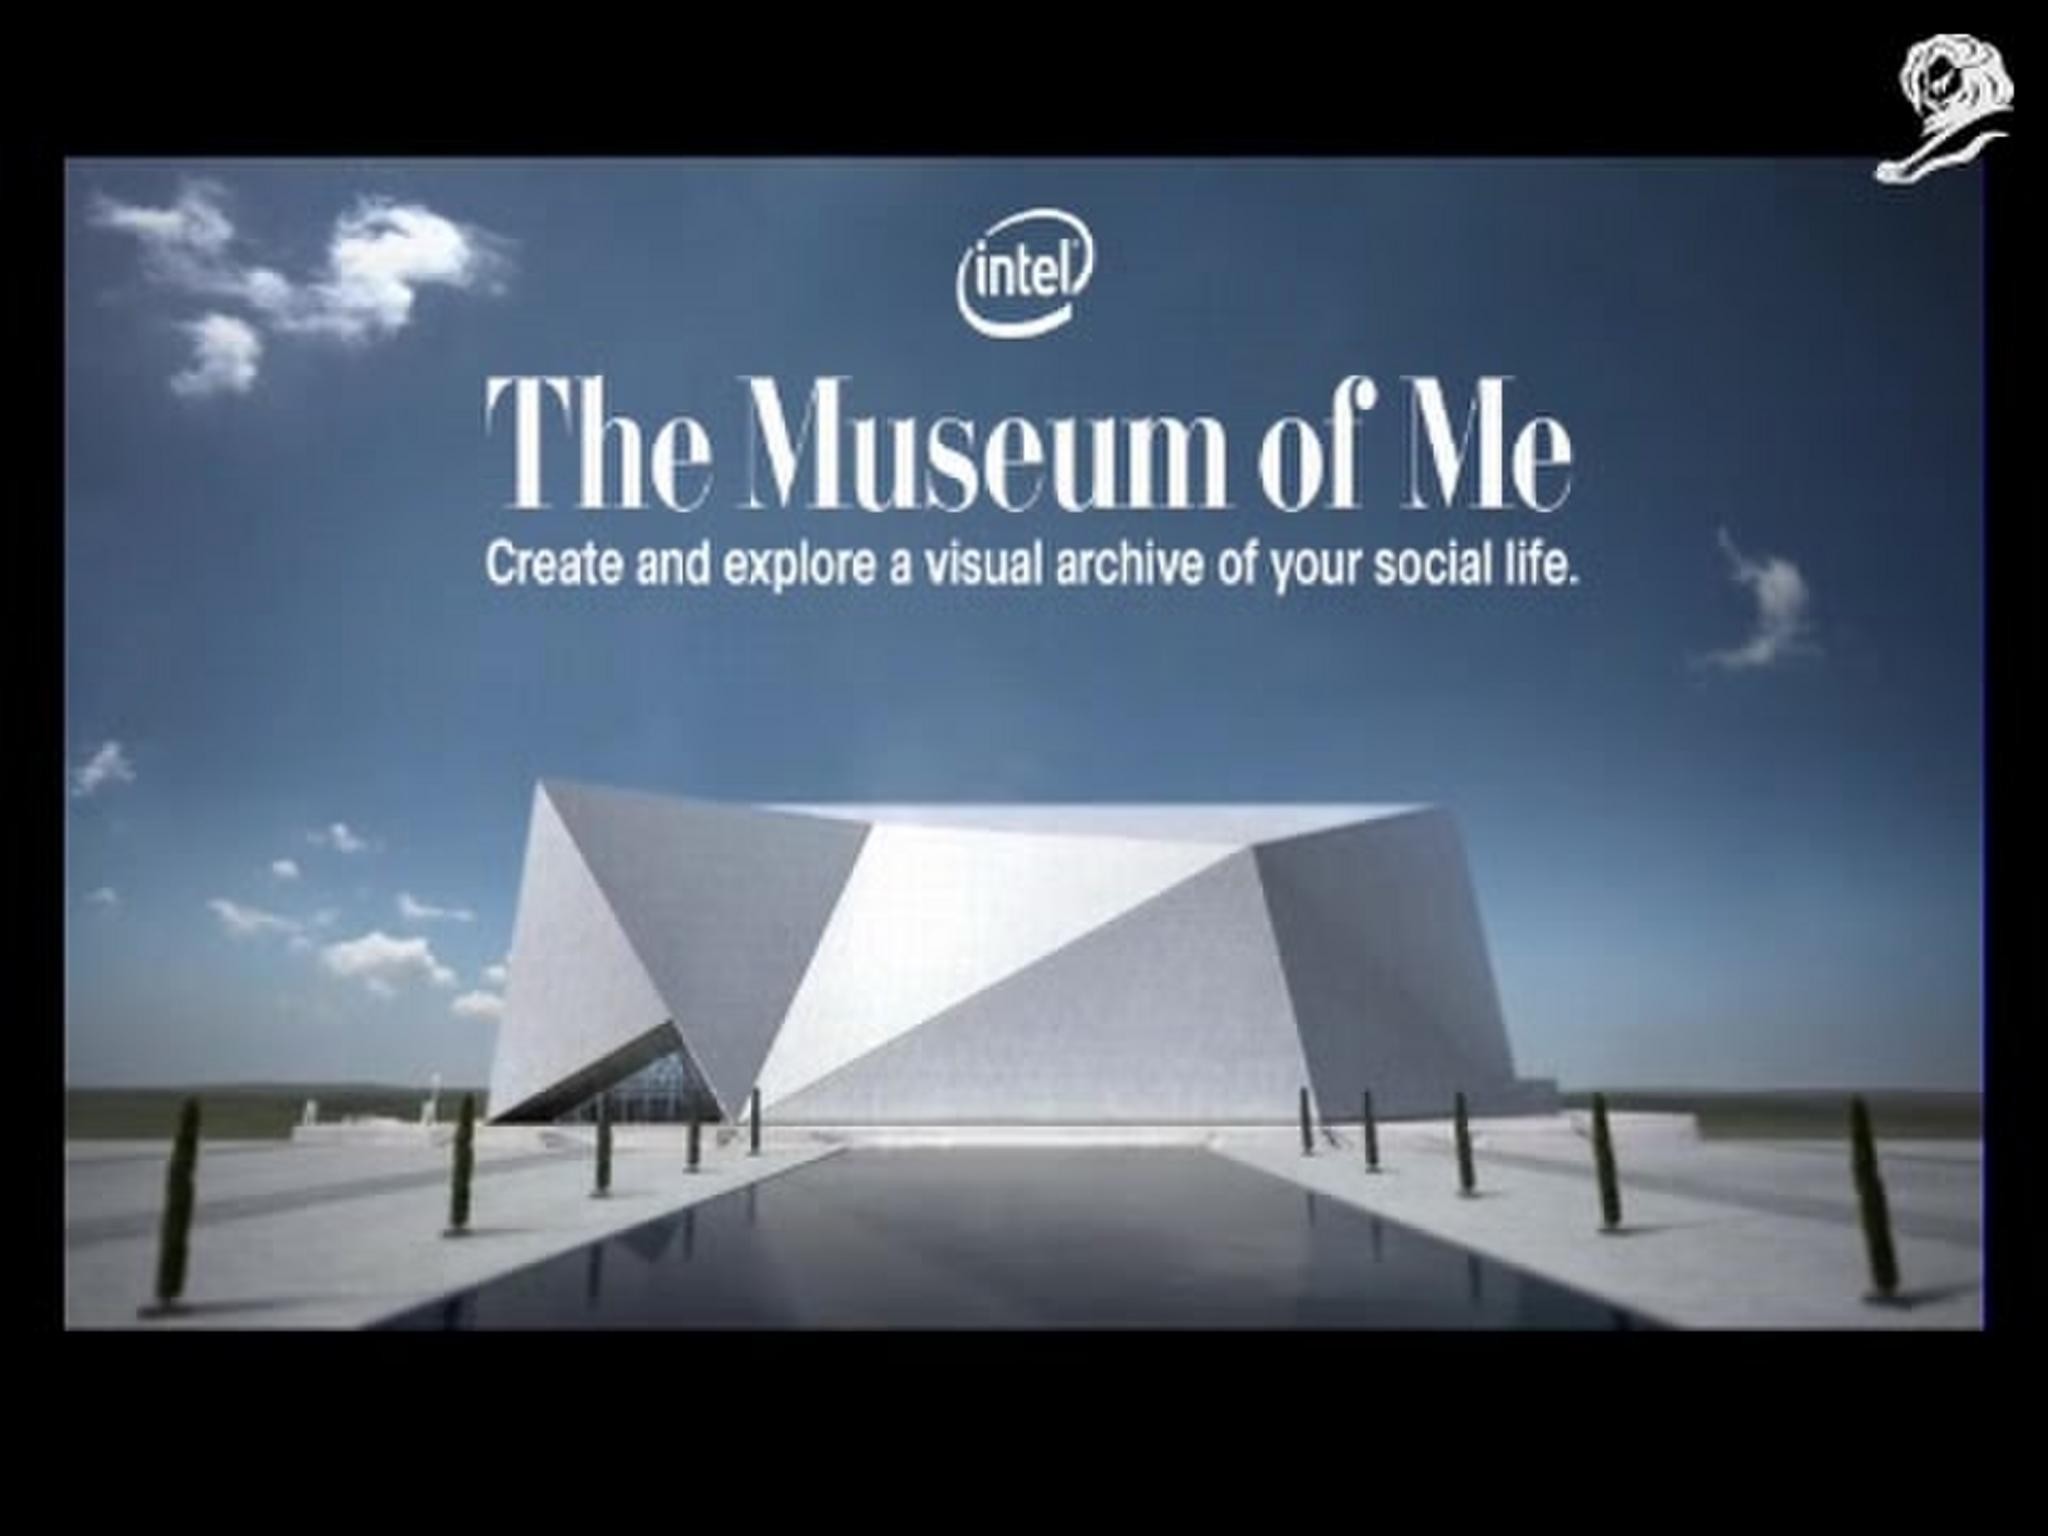 THE MUSEUM OF ME